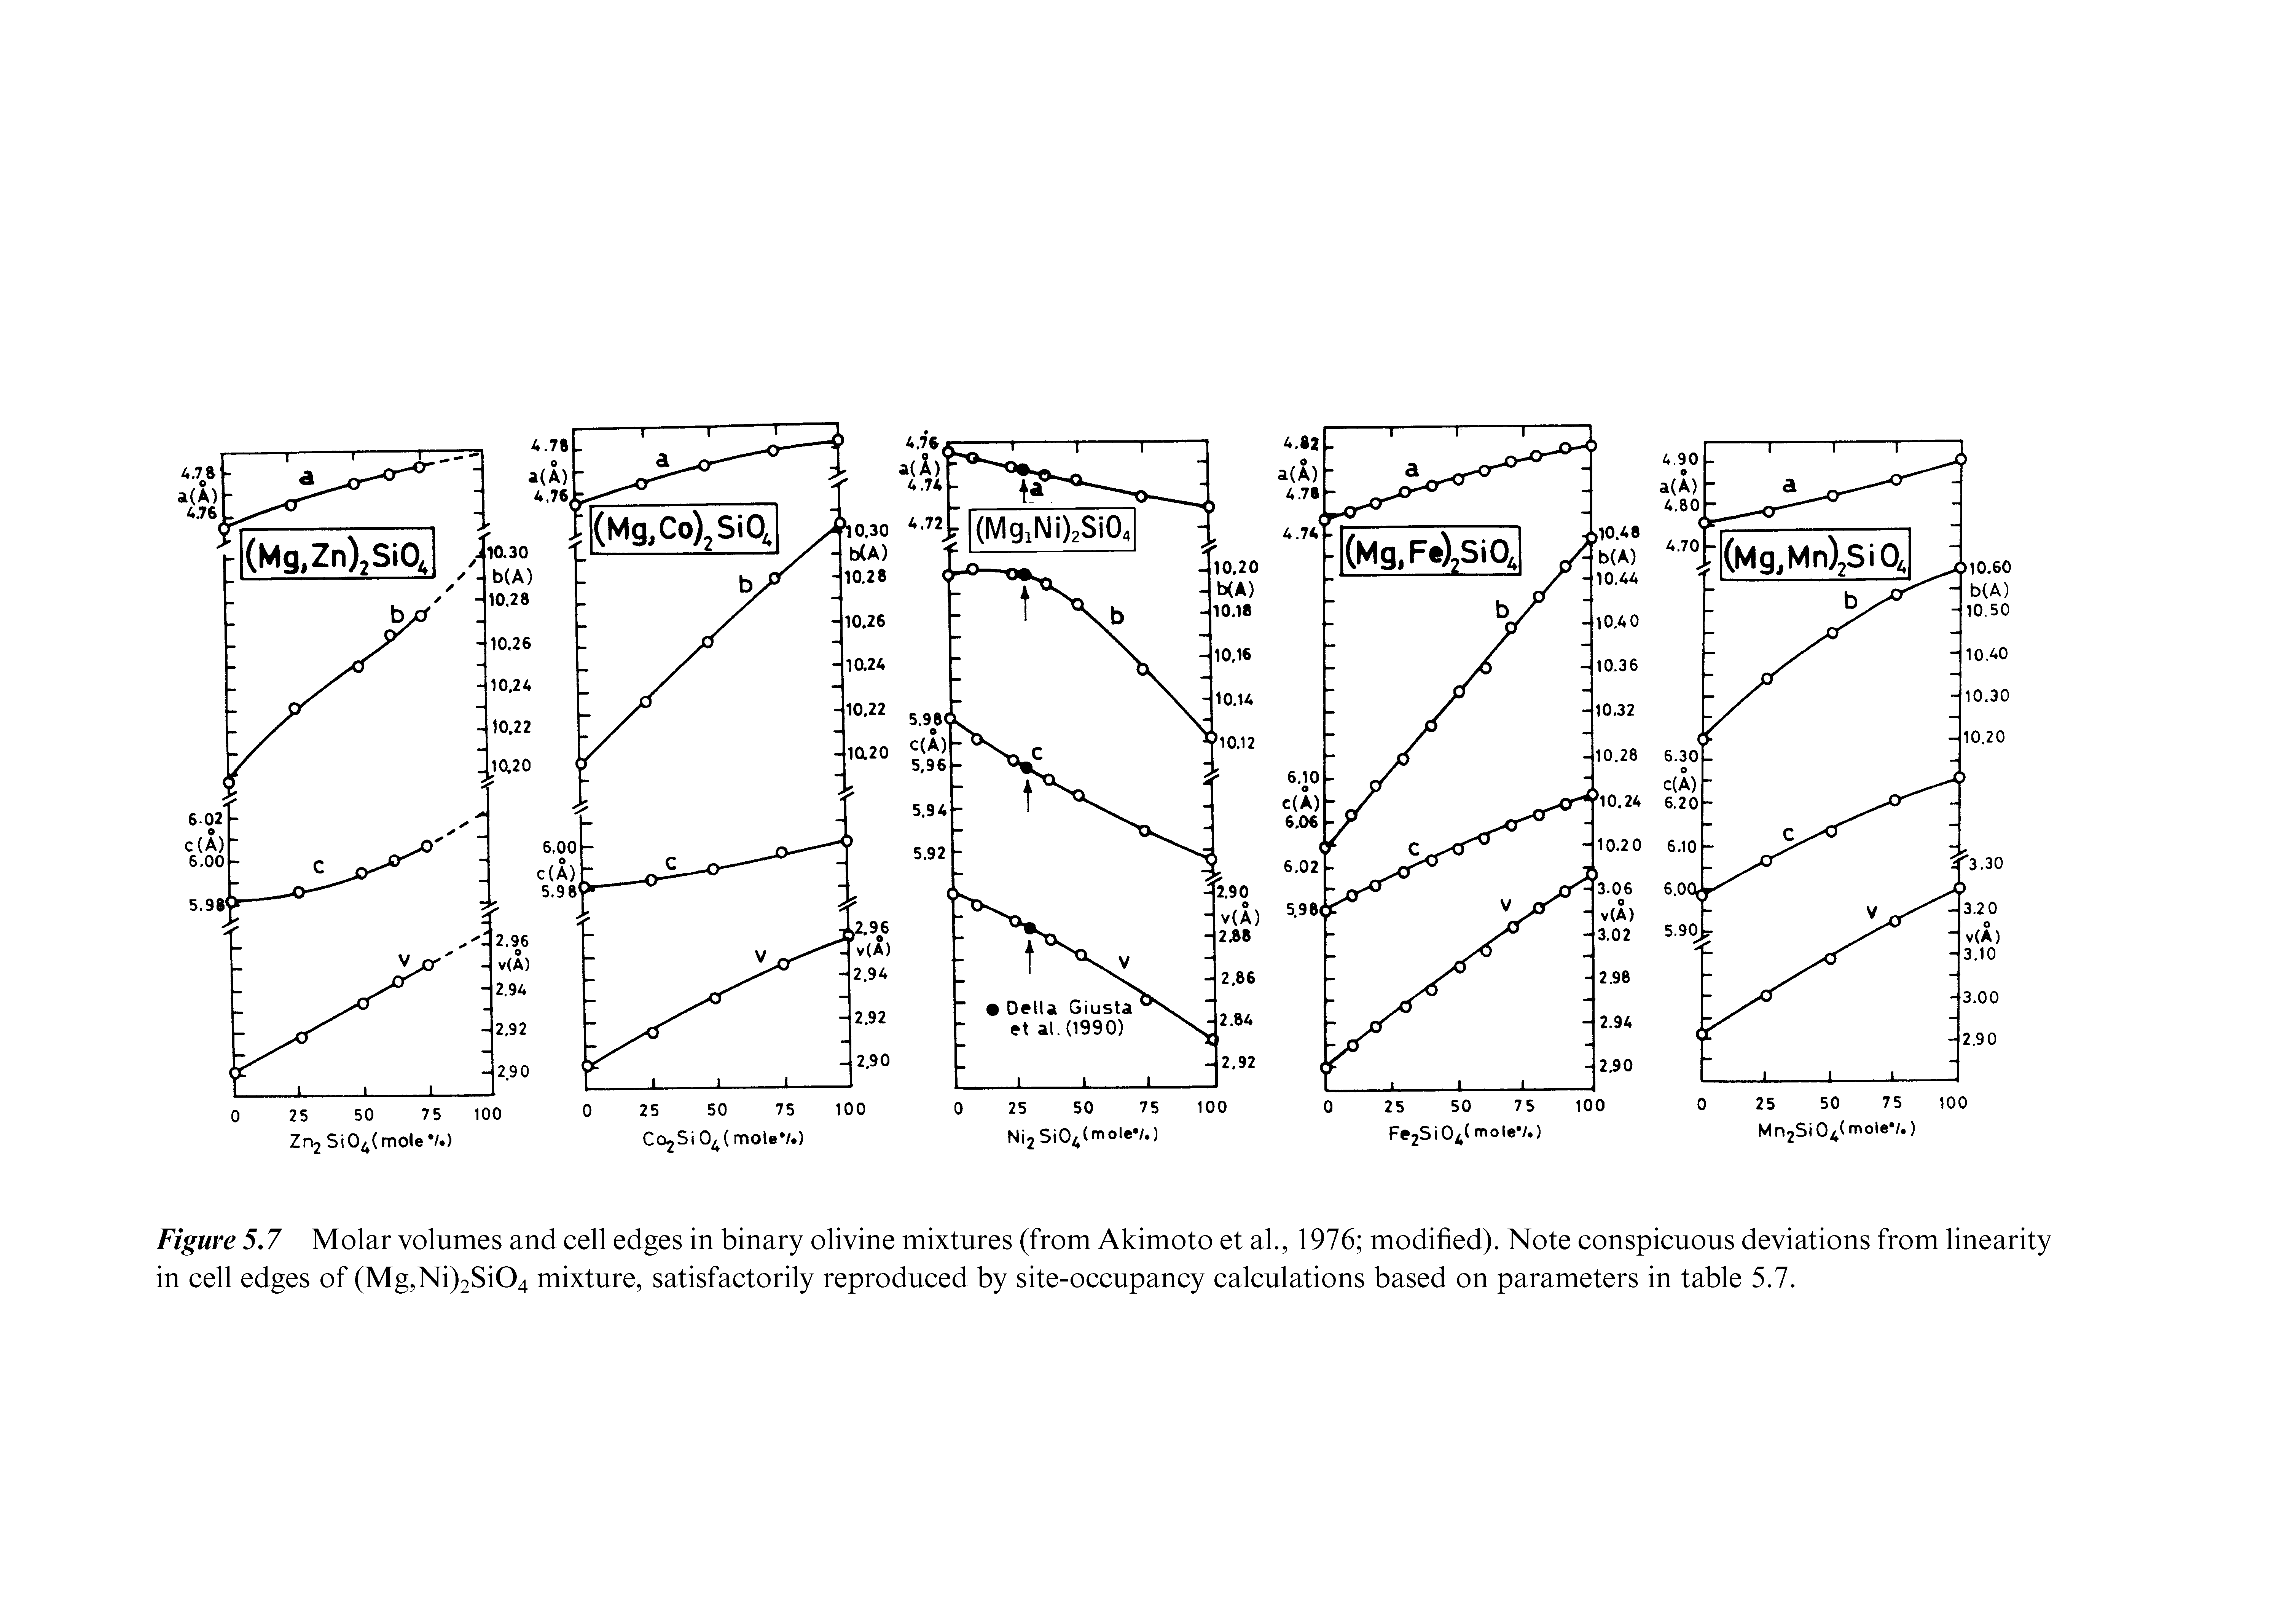 Figure 5.7 Molar volumes and cell edges in binary olivine mixtures (from Akimoto et al., 1976 modified). Note conspicuous deviations from linearity in cell edges of (Mg,Ni)2Si04 mixture, satisfactorily reproduced by site-occupancy calculations based on parameters in table 5.7.